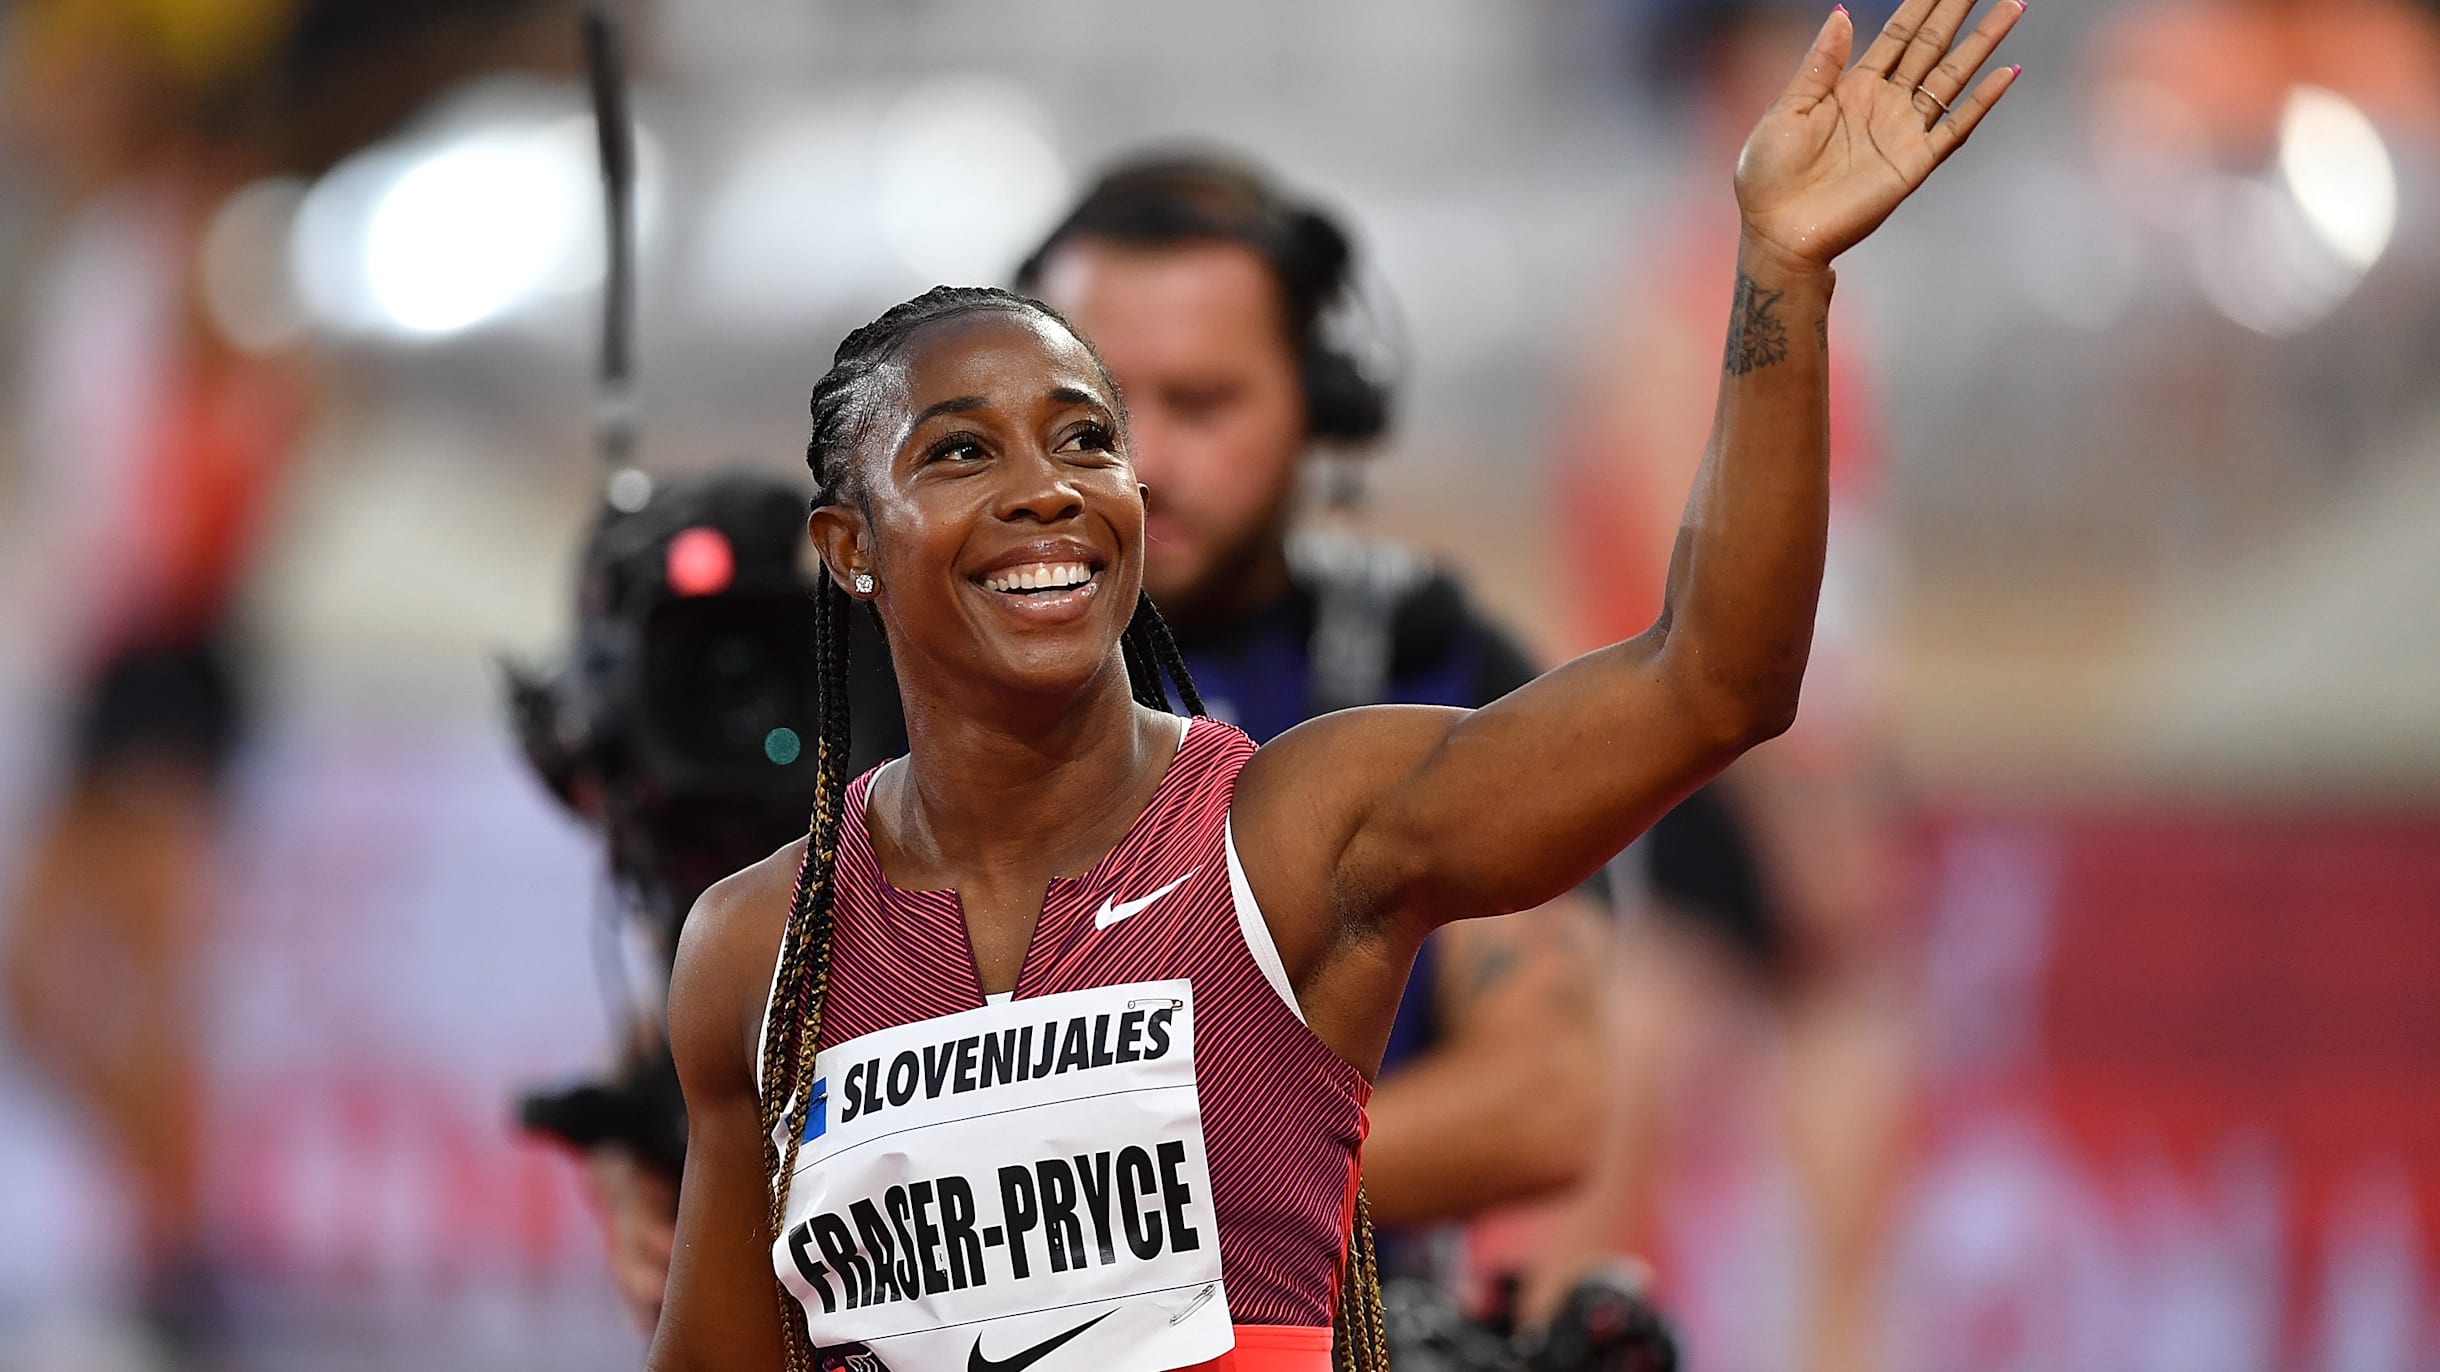 How to watch Shelly-Ann Fraser-Pryce live at 2023 Track and Field World Championships